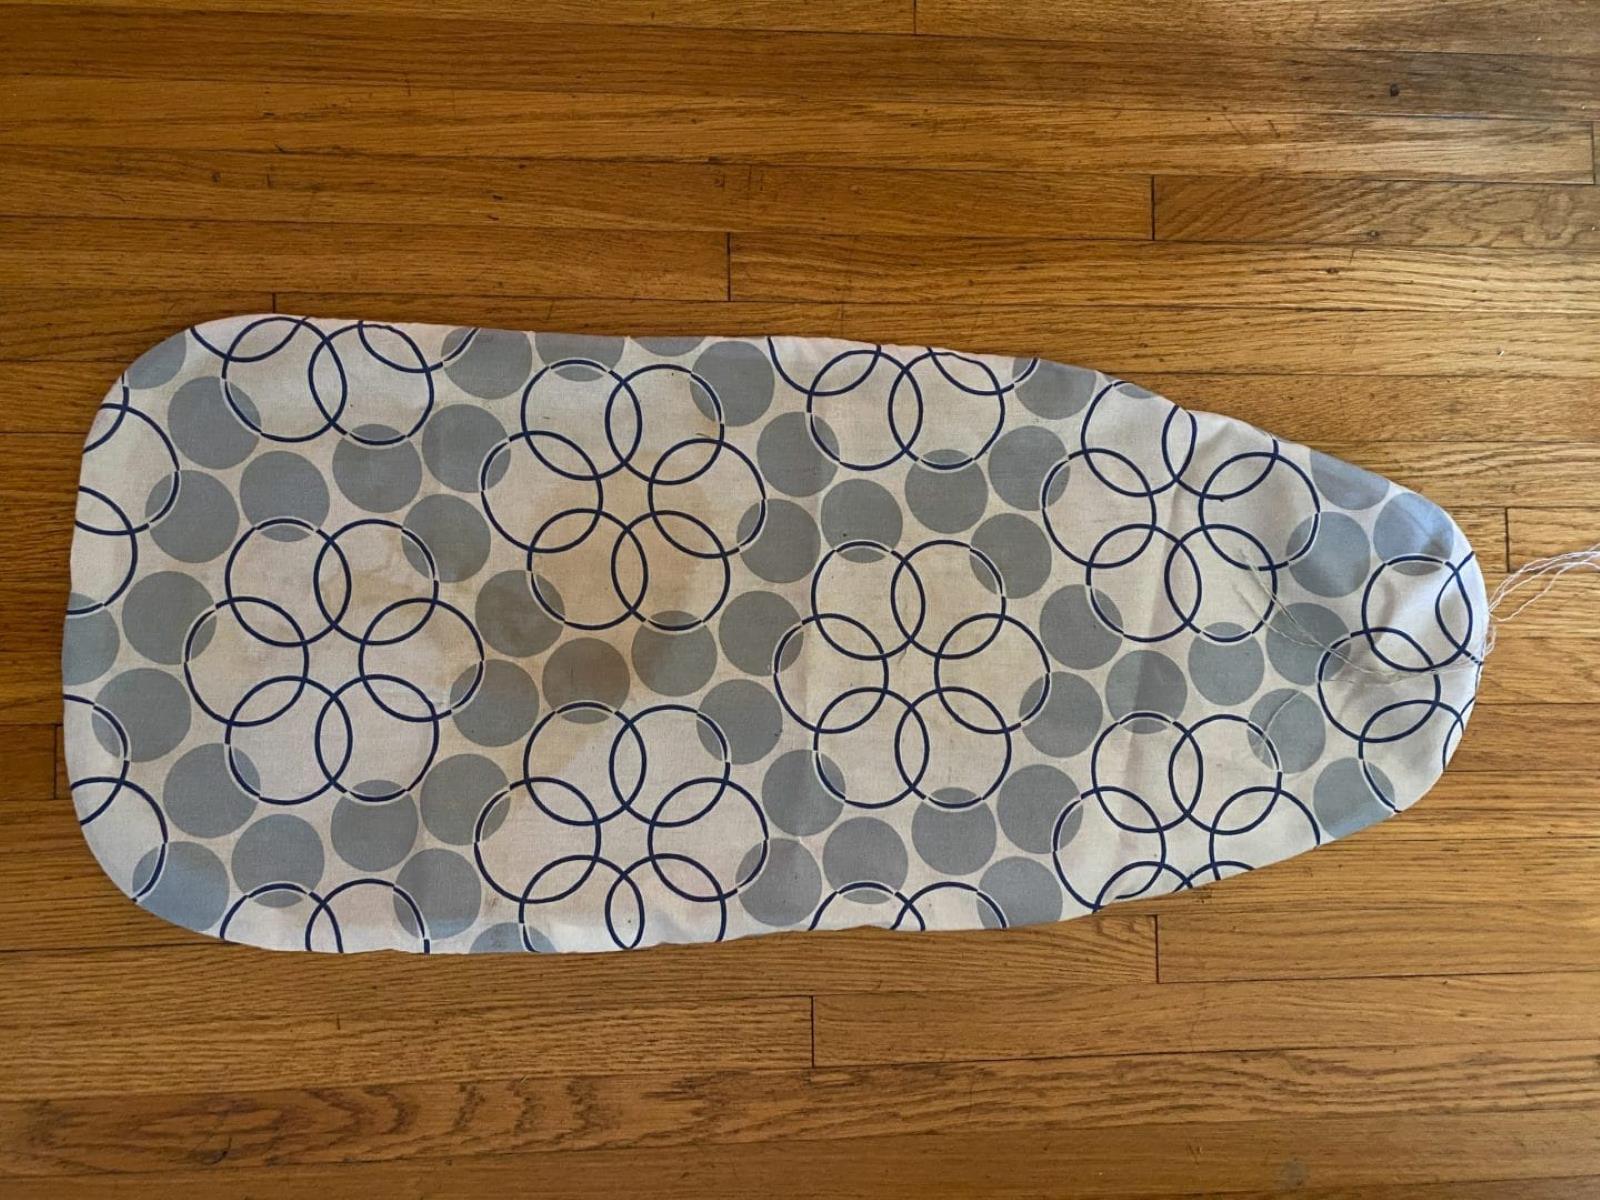 How To Make An Ironing Board Cover